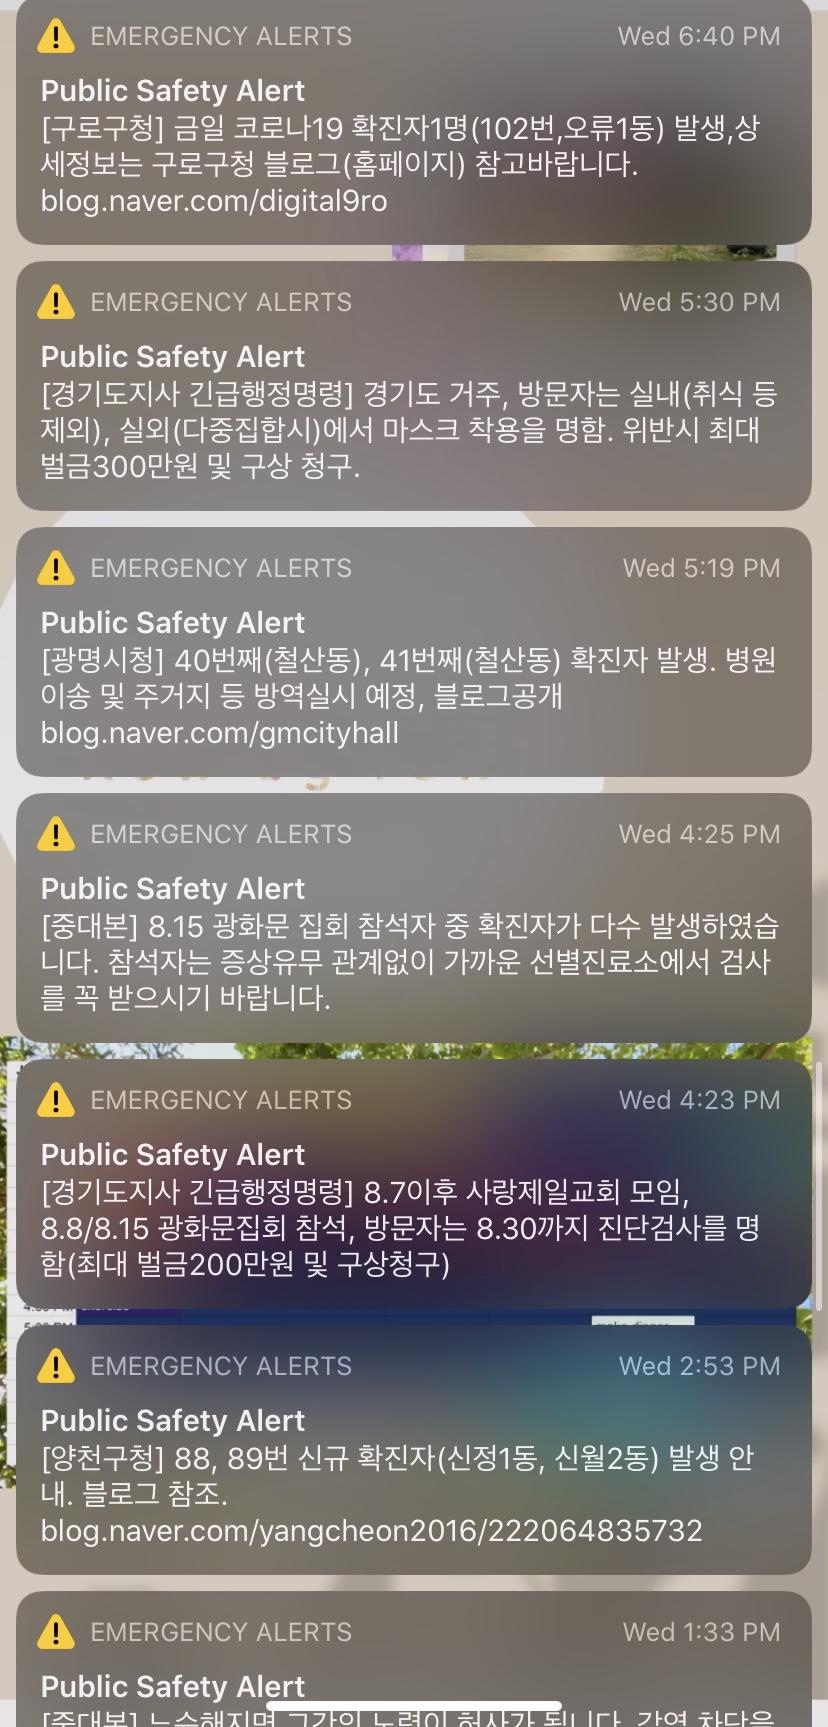 The Wireless Emergency Alerts system notifies me every time there is a new COVID-related update. I received seven COVID-19 alerts in the span of six hours Aug. 23, and 10 total that day.